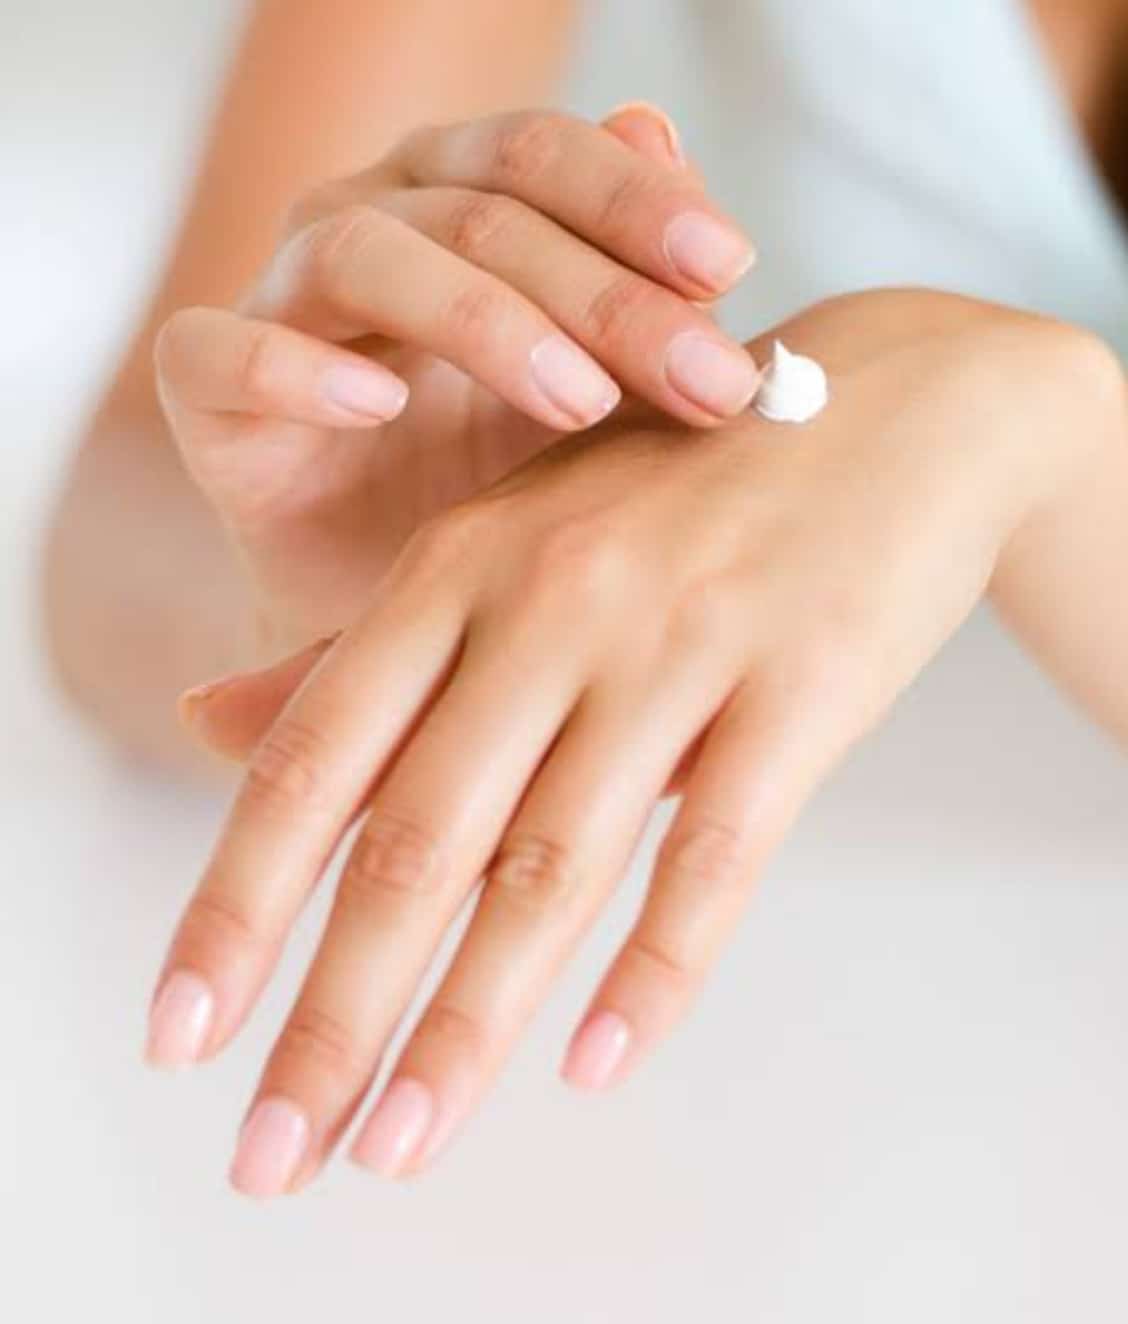 Natural recipes for moisturizing dry hands